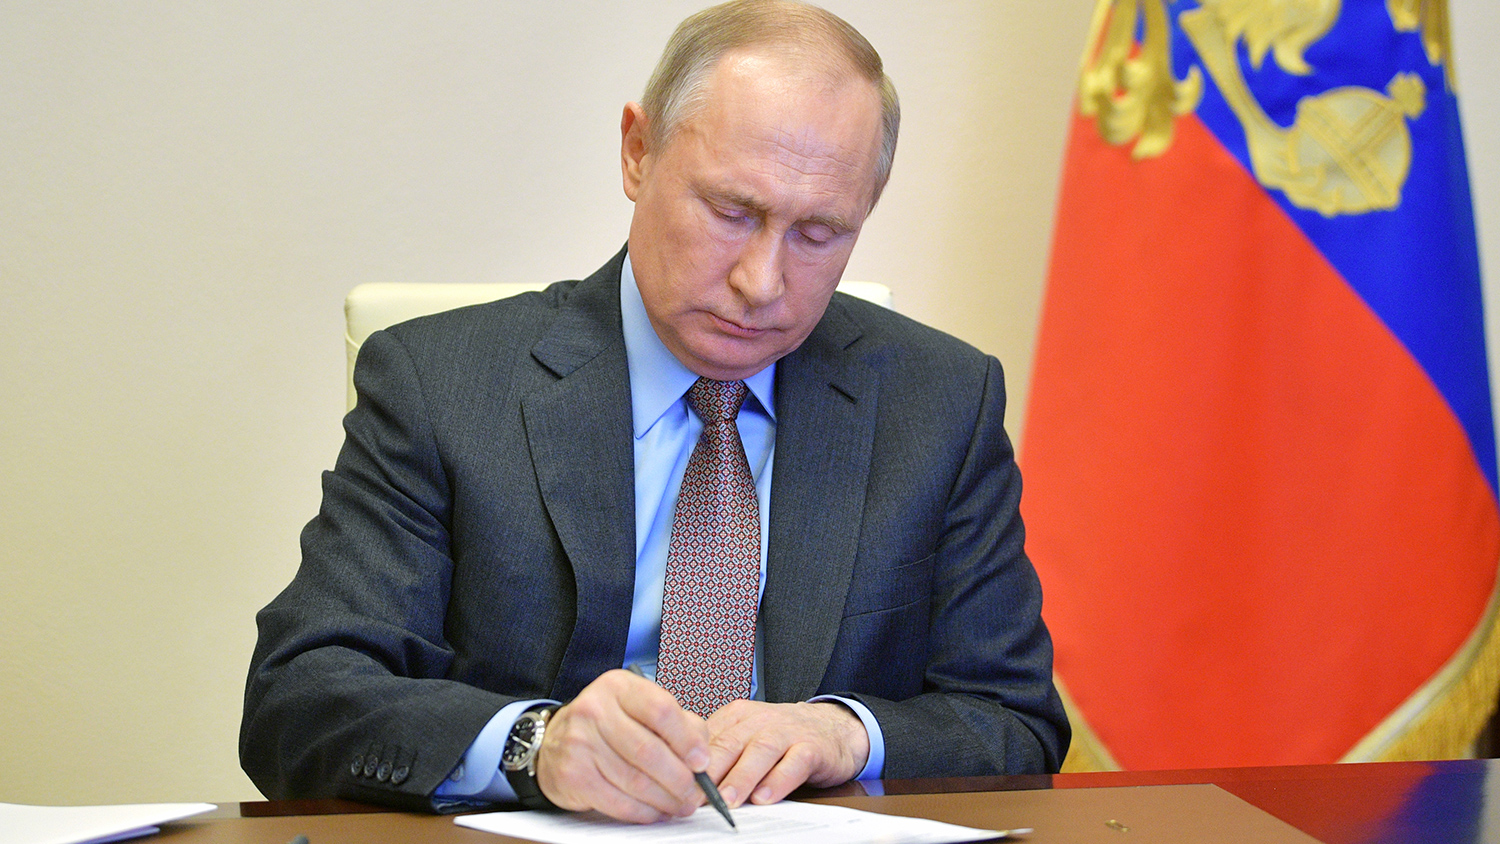 Vladimir Putin assigned to elaborate an agreement on increasing grain exports to China